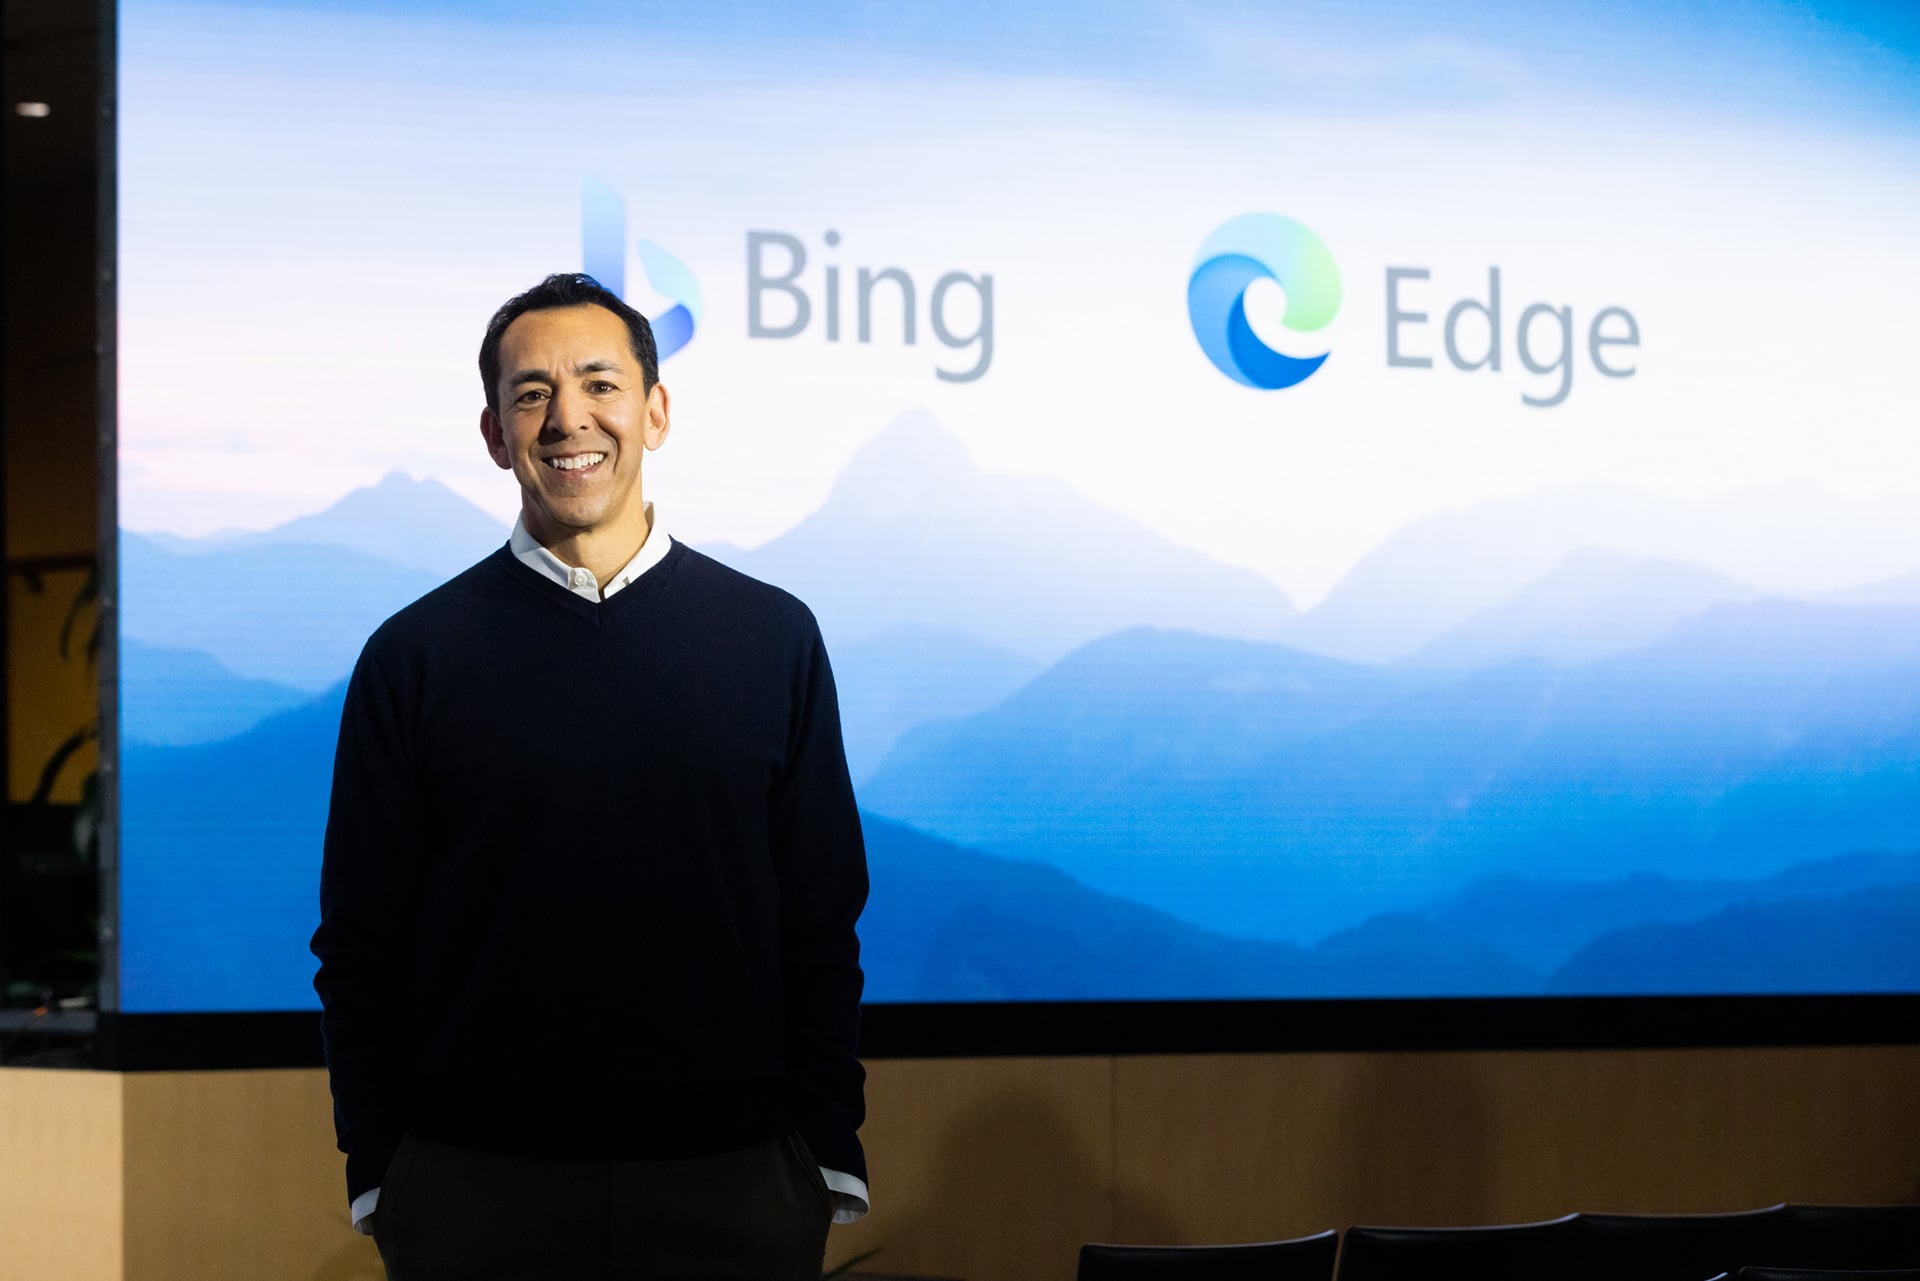 Microsoft: Bing saw the largest relevancy jump in search in two decades